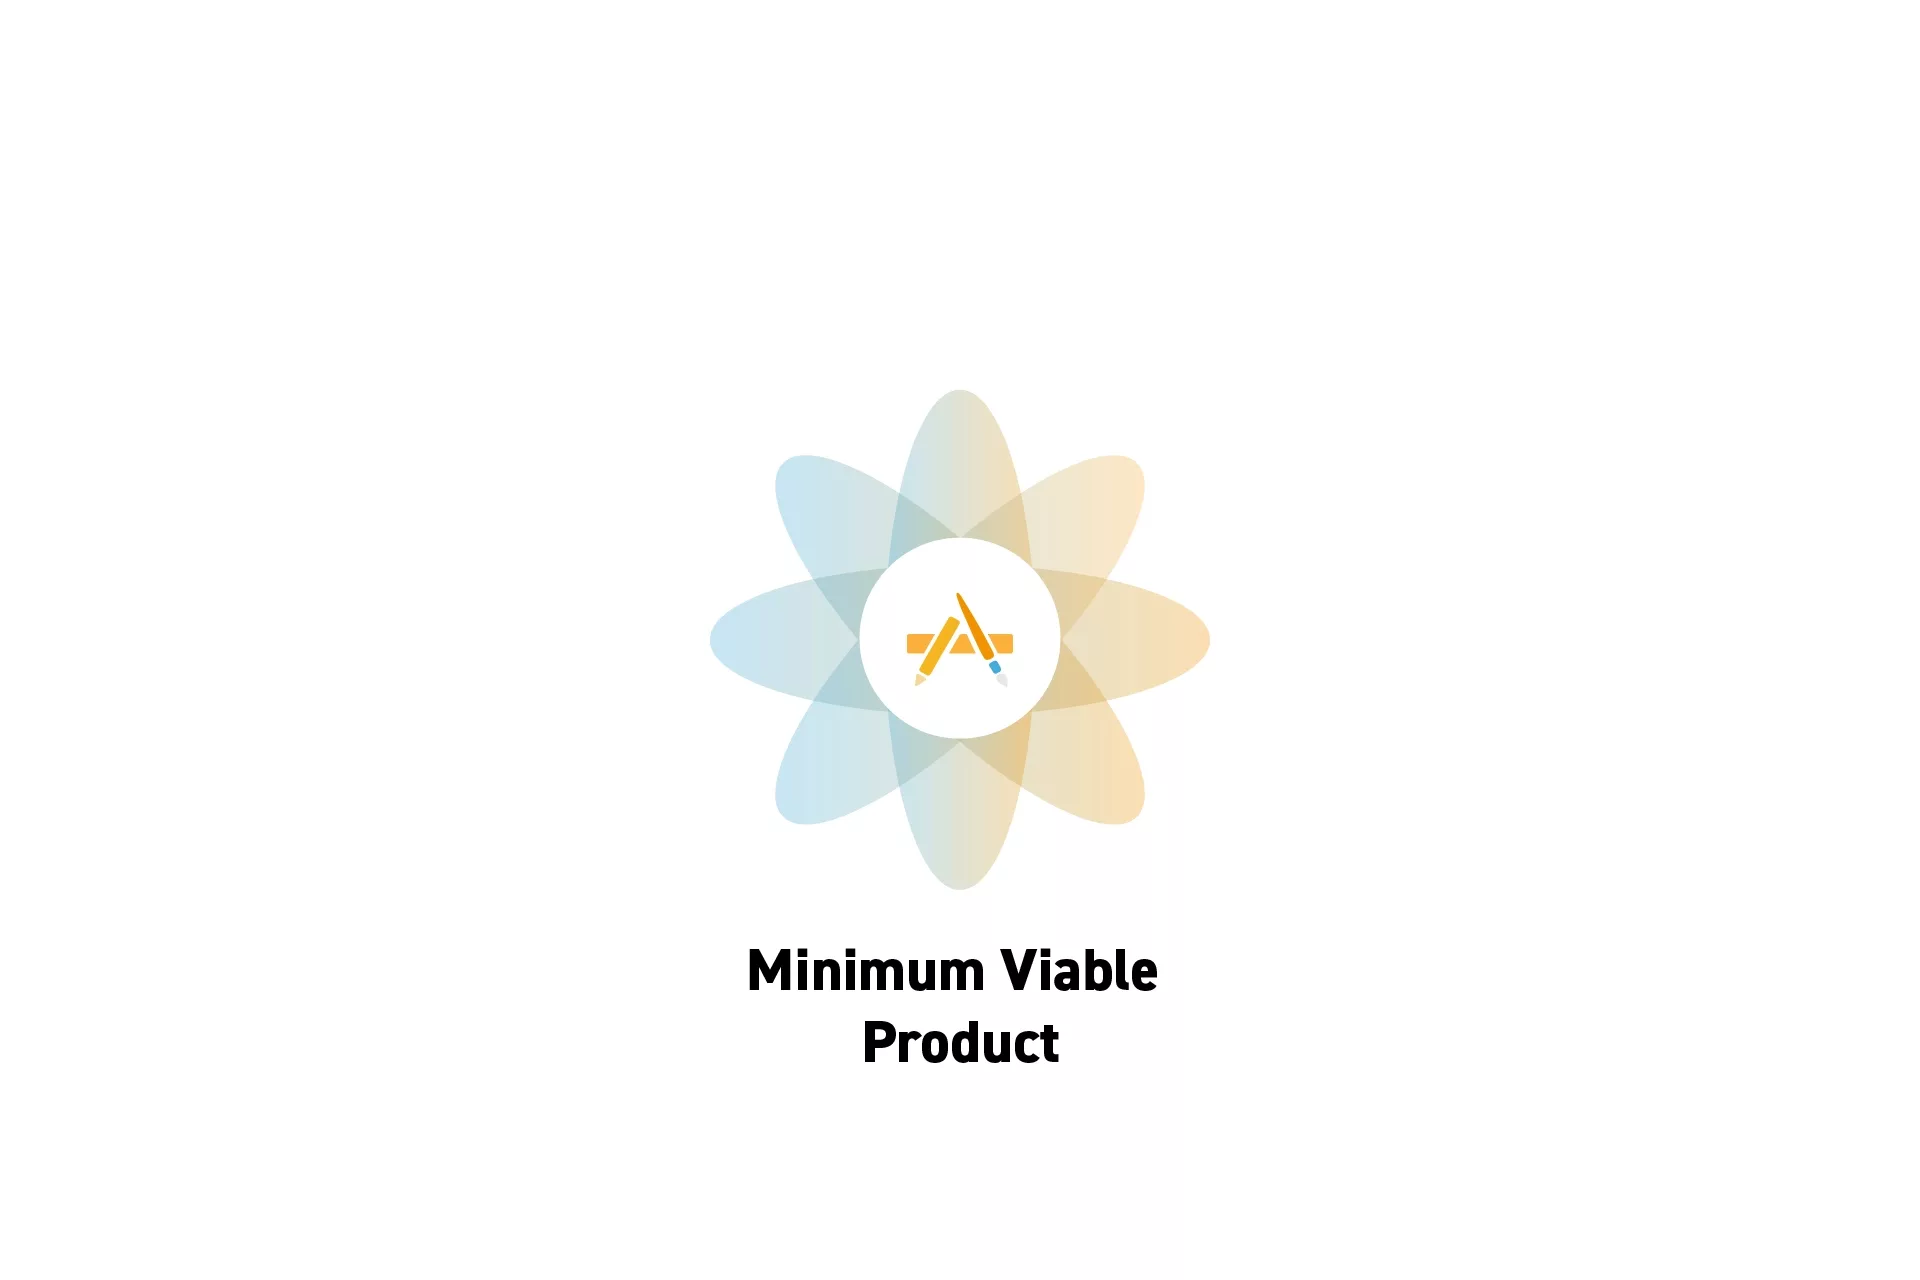 A flower that represents Digital Craft with the text “Minimum Viable Product” beneath it.